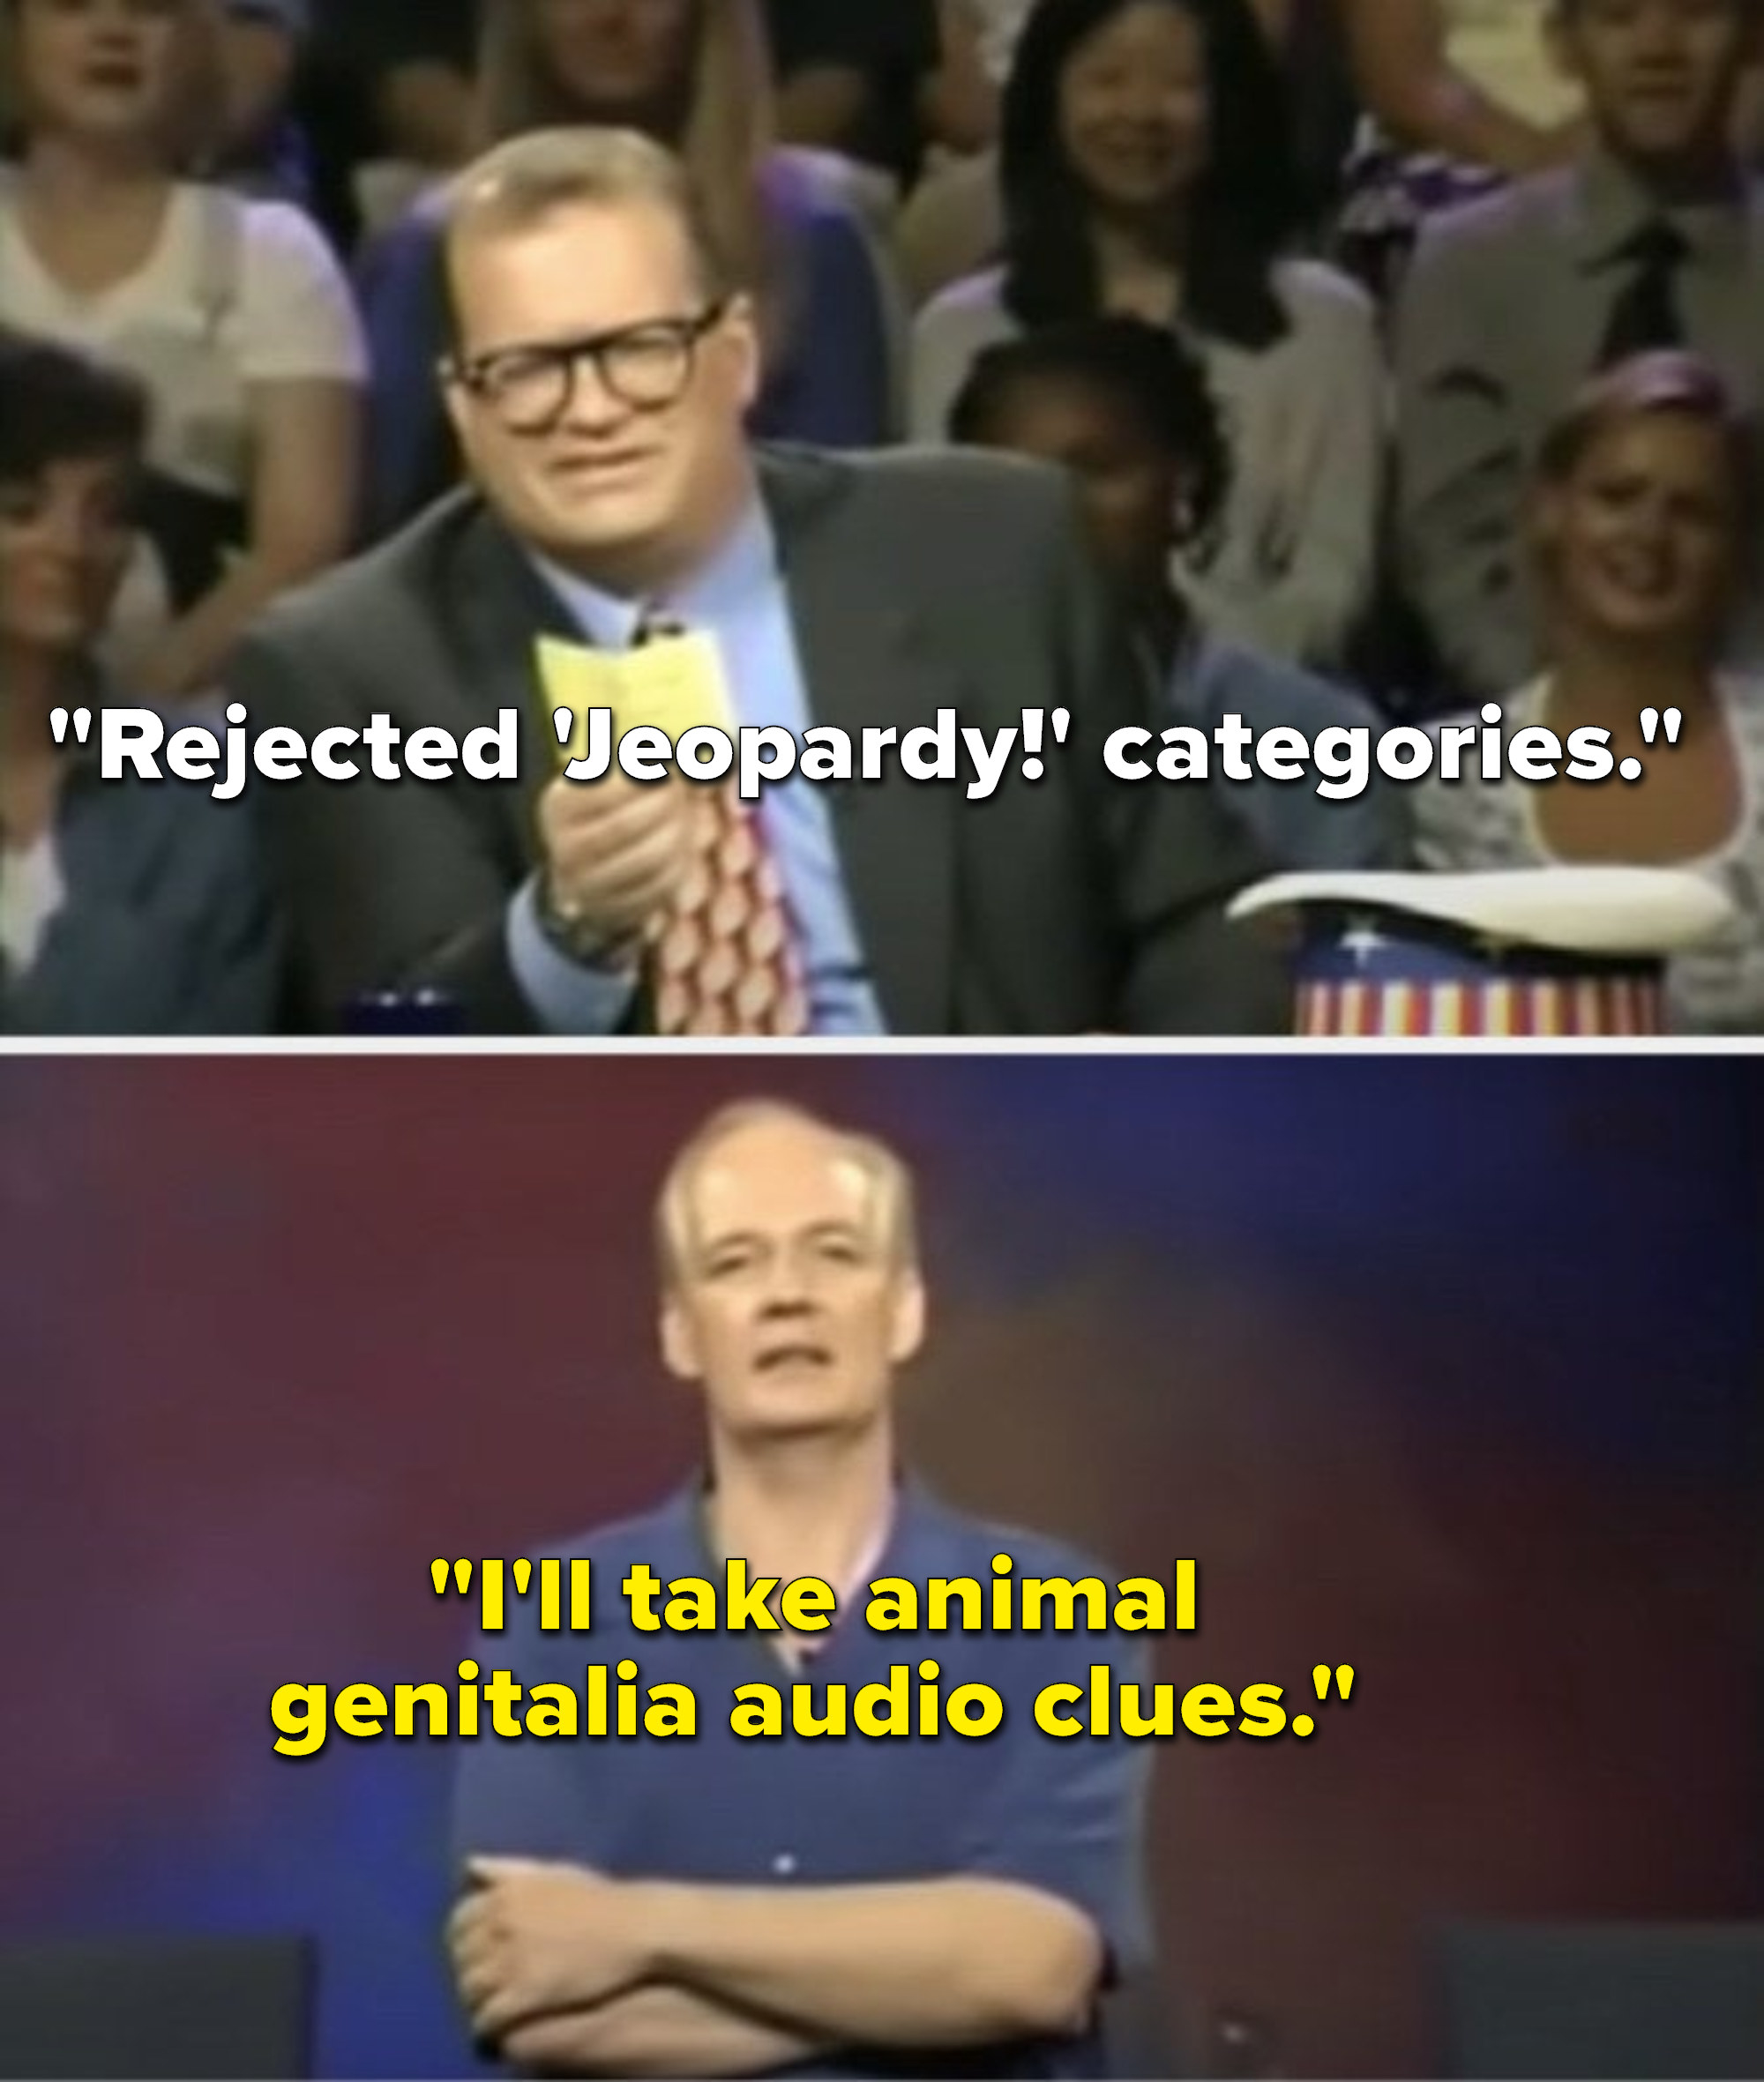 Carey says, &quot;Rejected &#x27;Jeopardy&#x27; categories,&quot; and Mochrie says, &quot;I&#x27;ll take animal genitalia audio clues&quot;